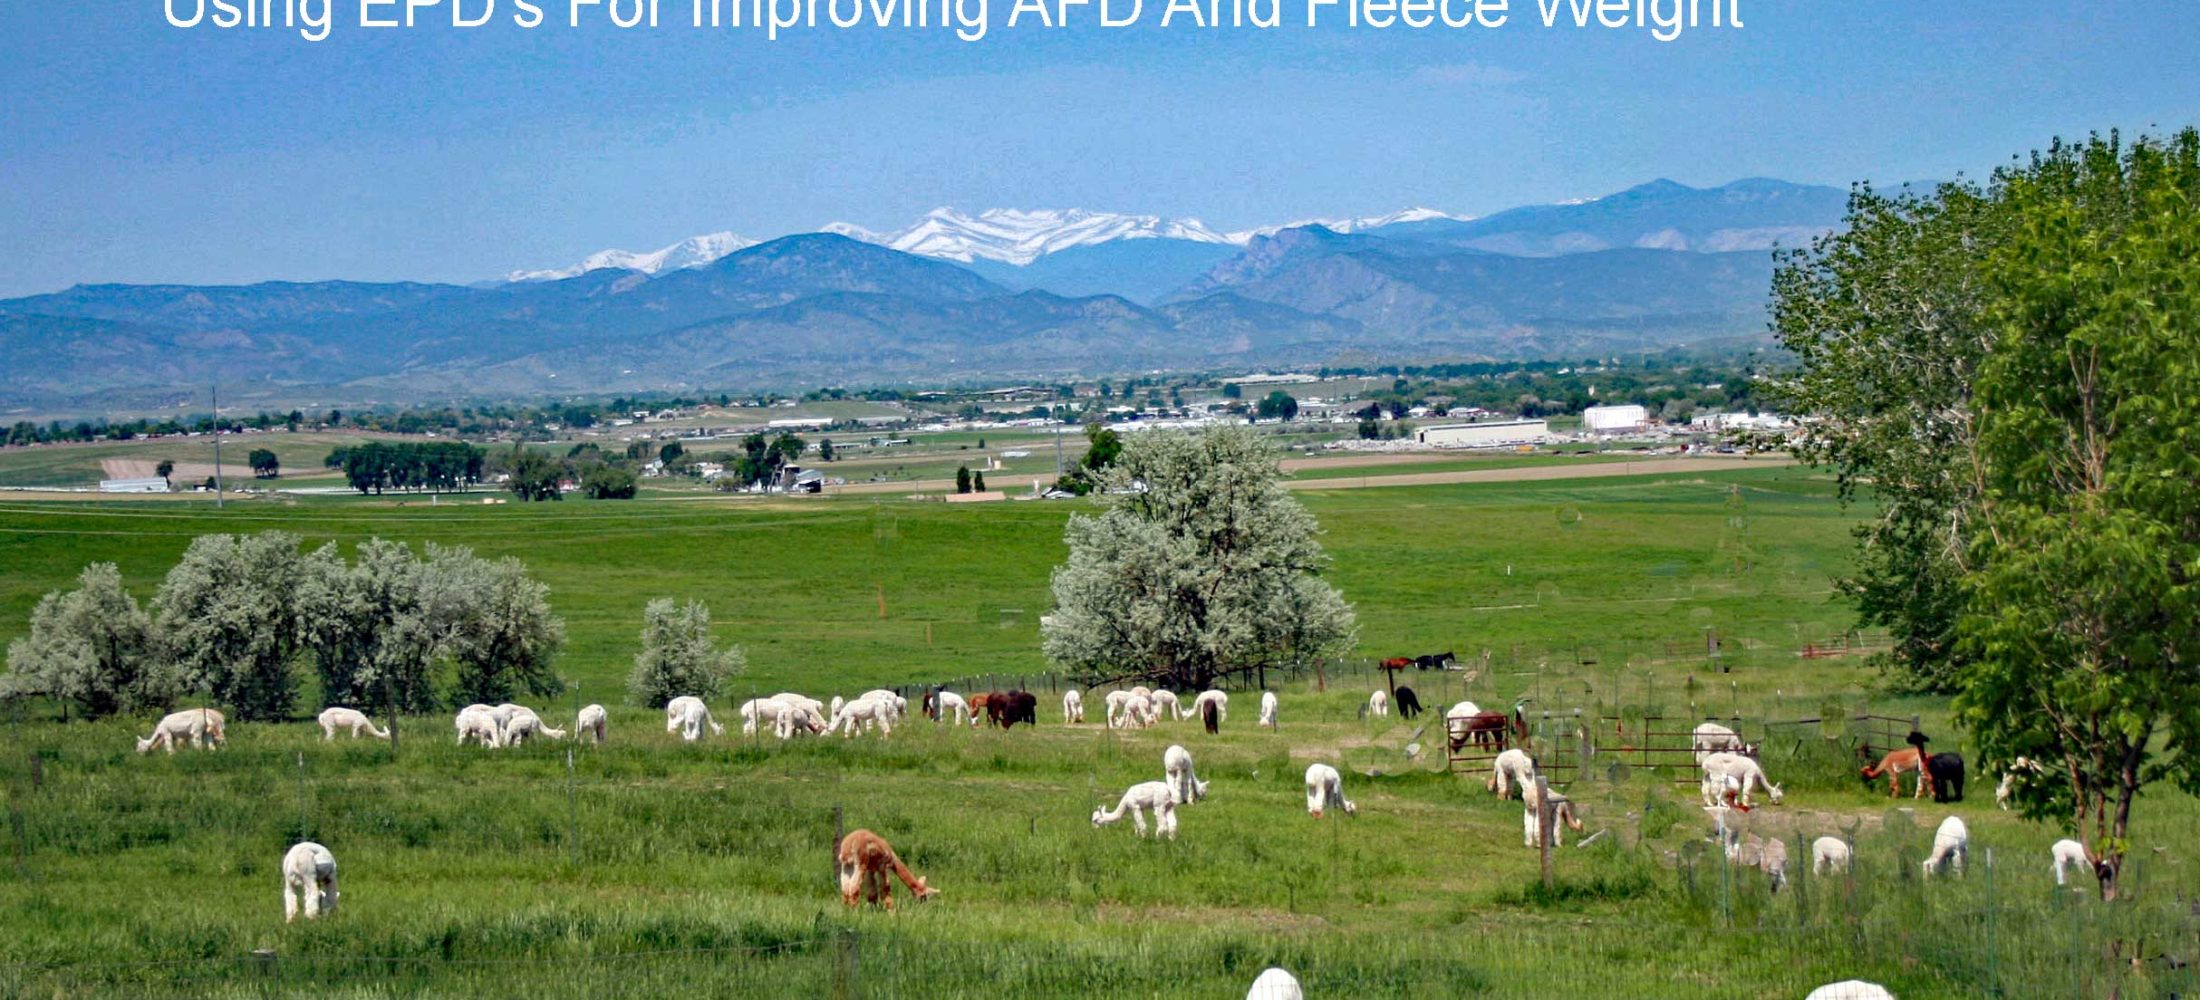 Using EPD's For Improving AFD and Fleece Weight